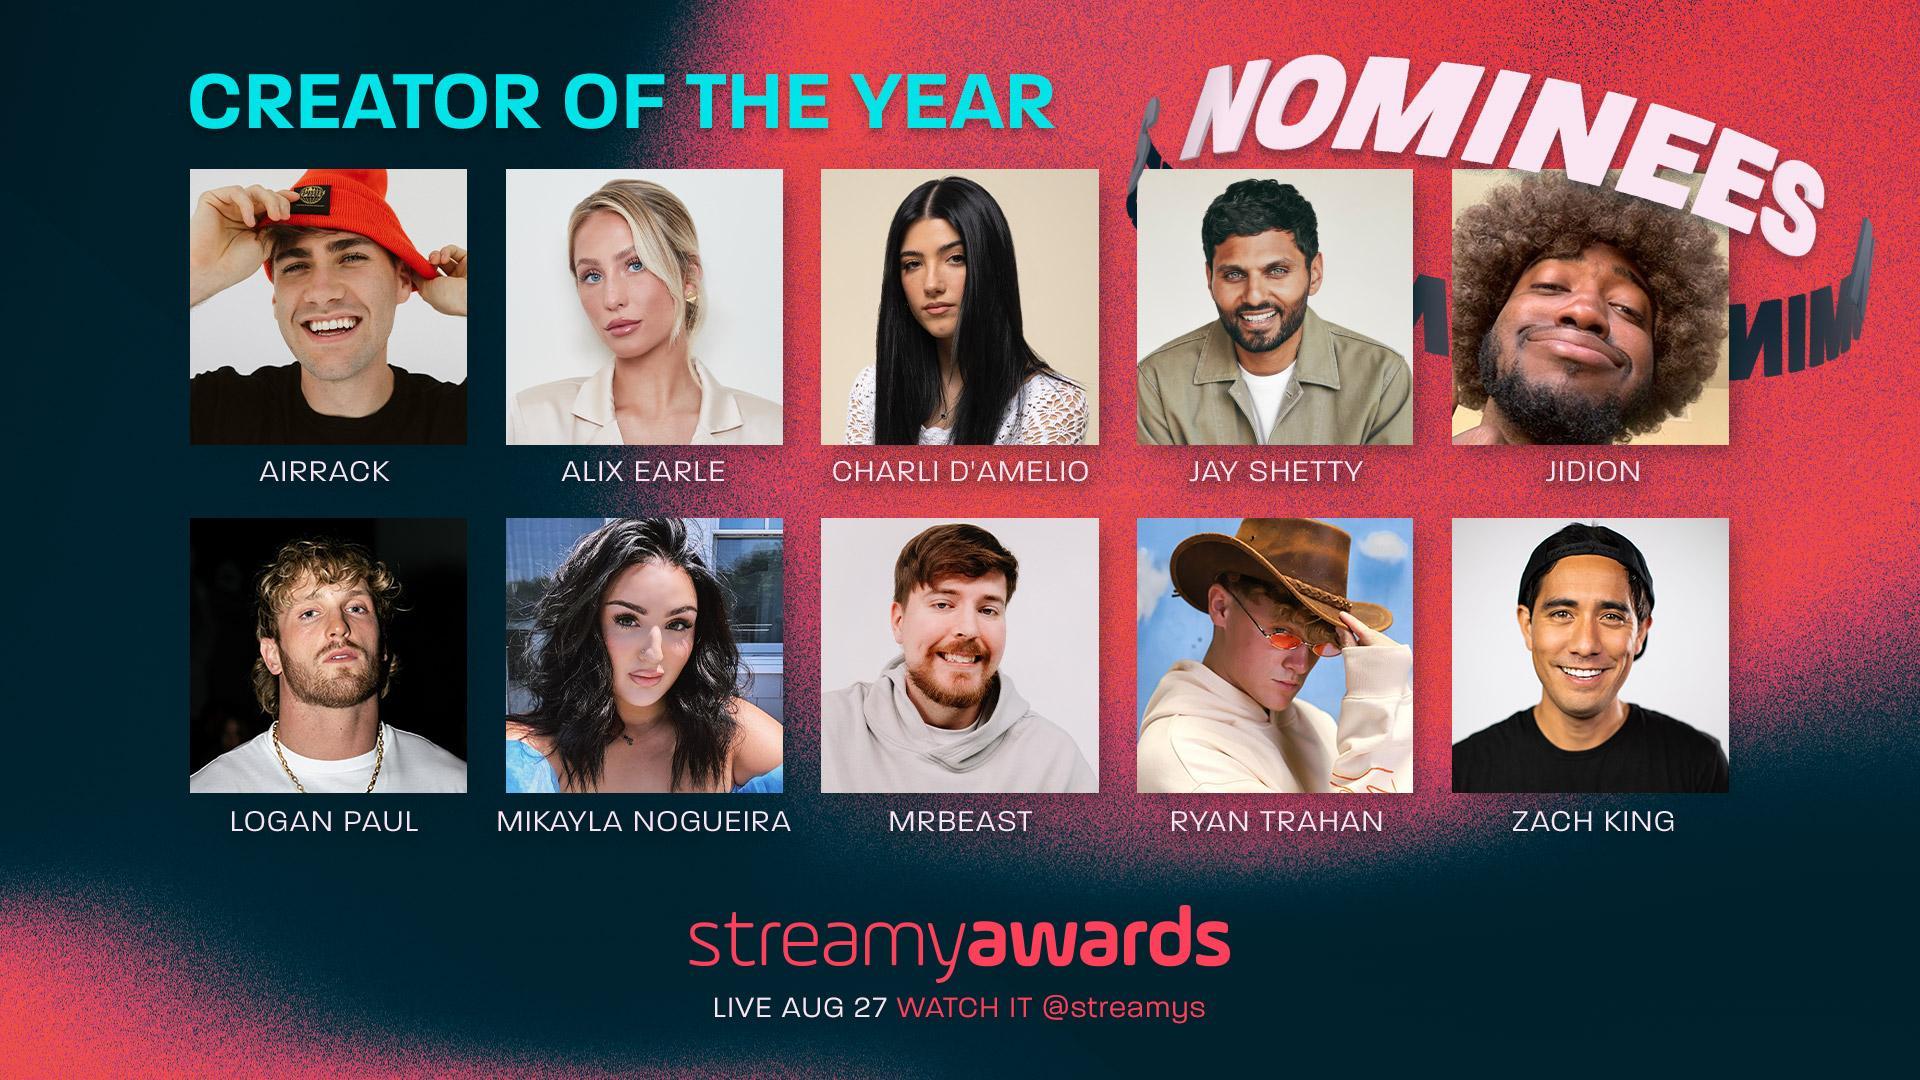 Meghan Trainor Wins Rolling Stone Sound of the Year at Streamys